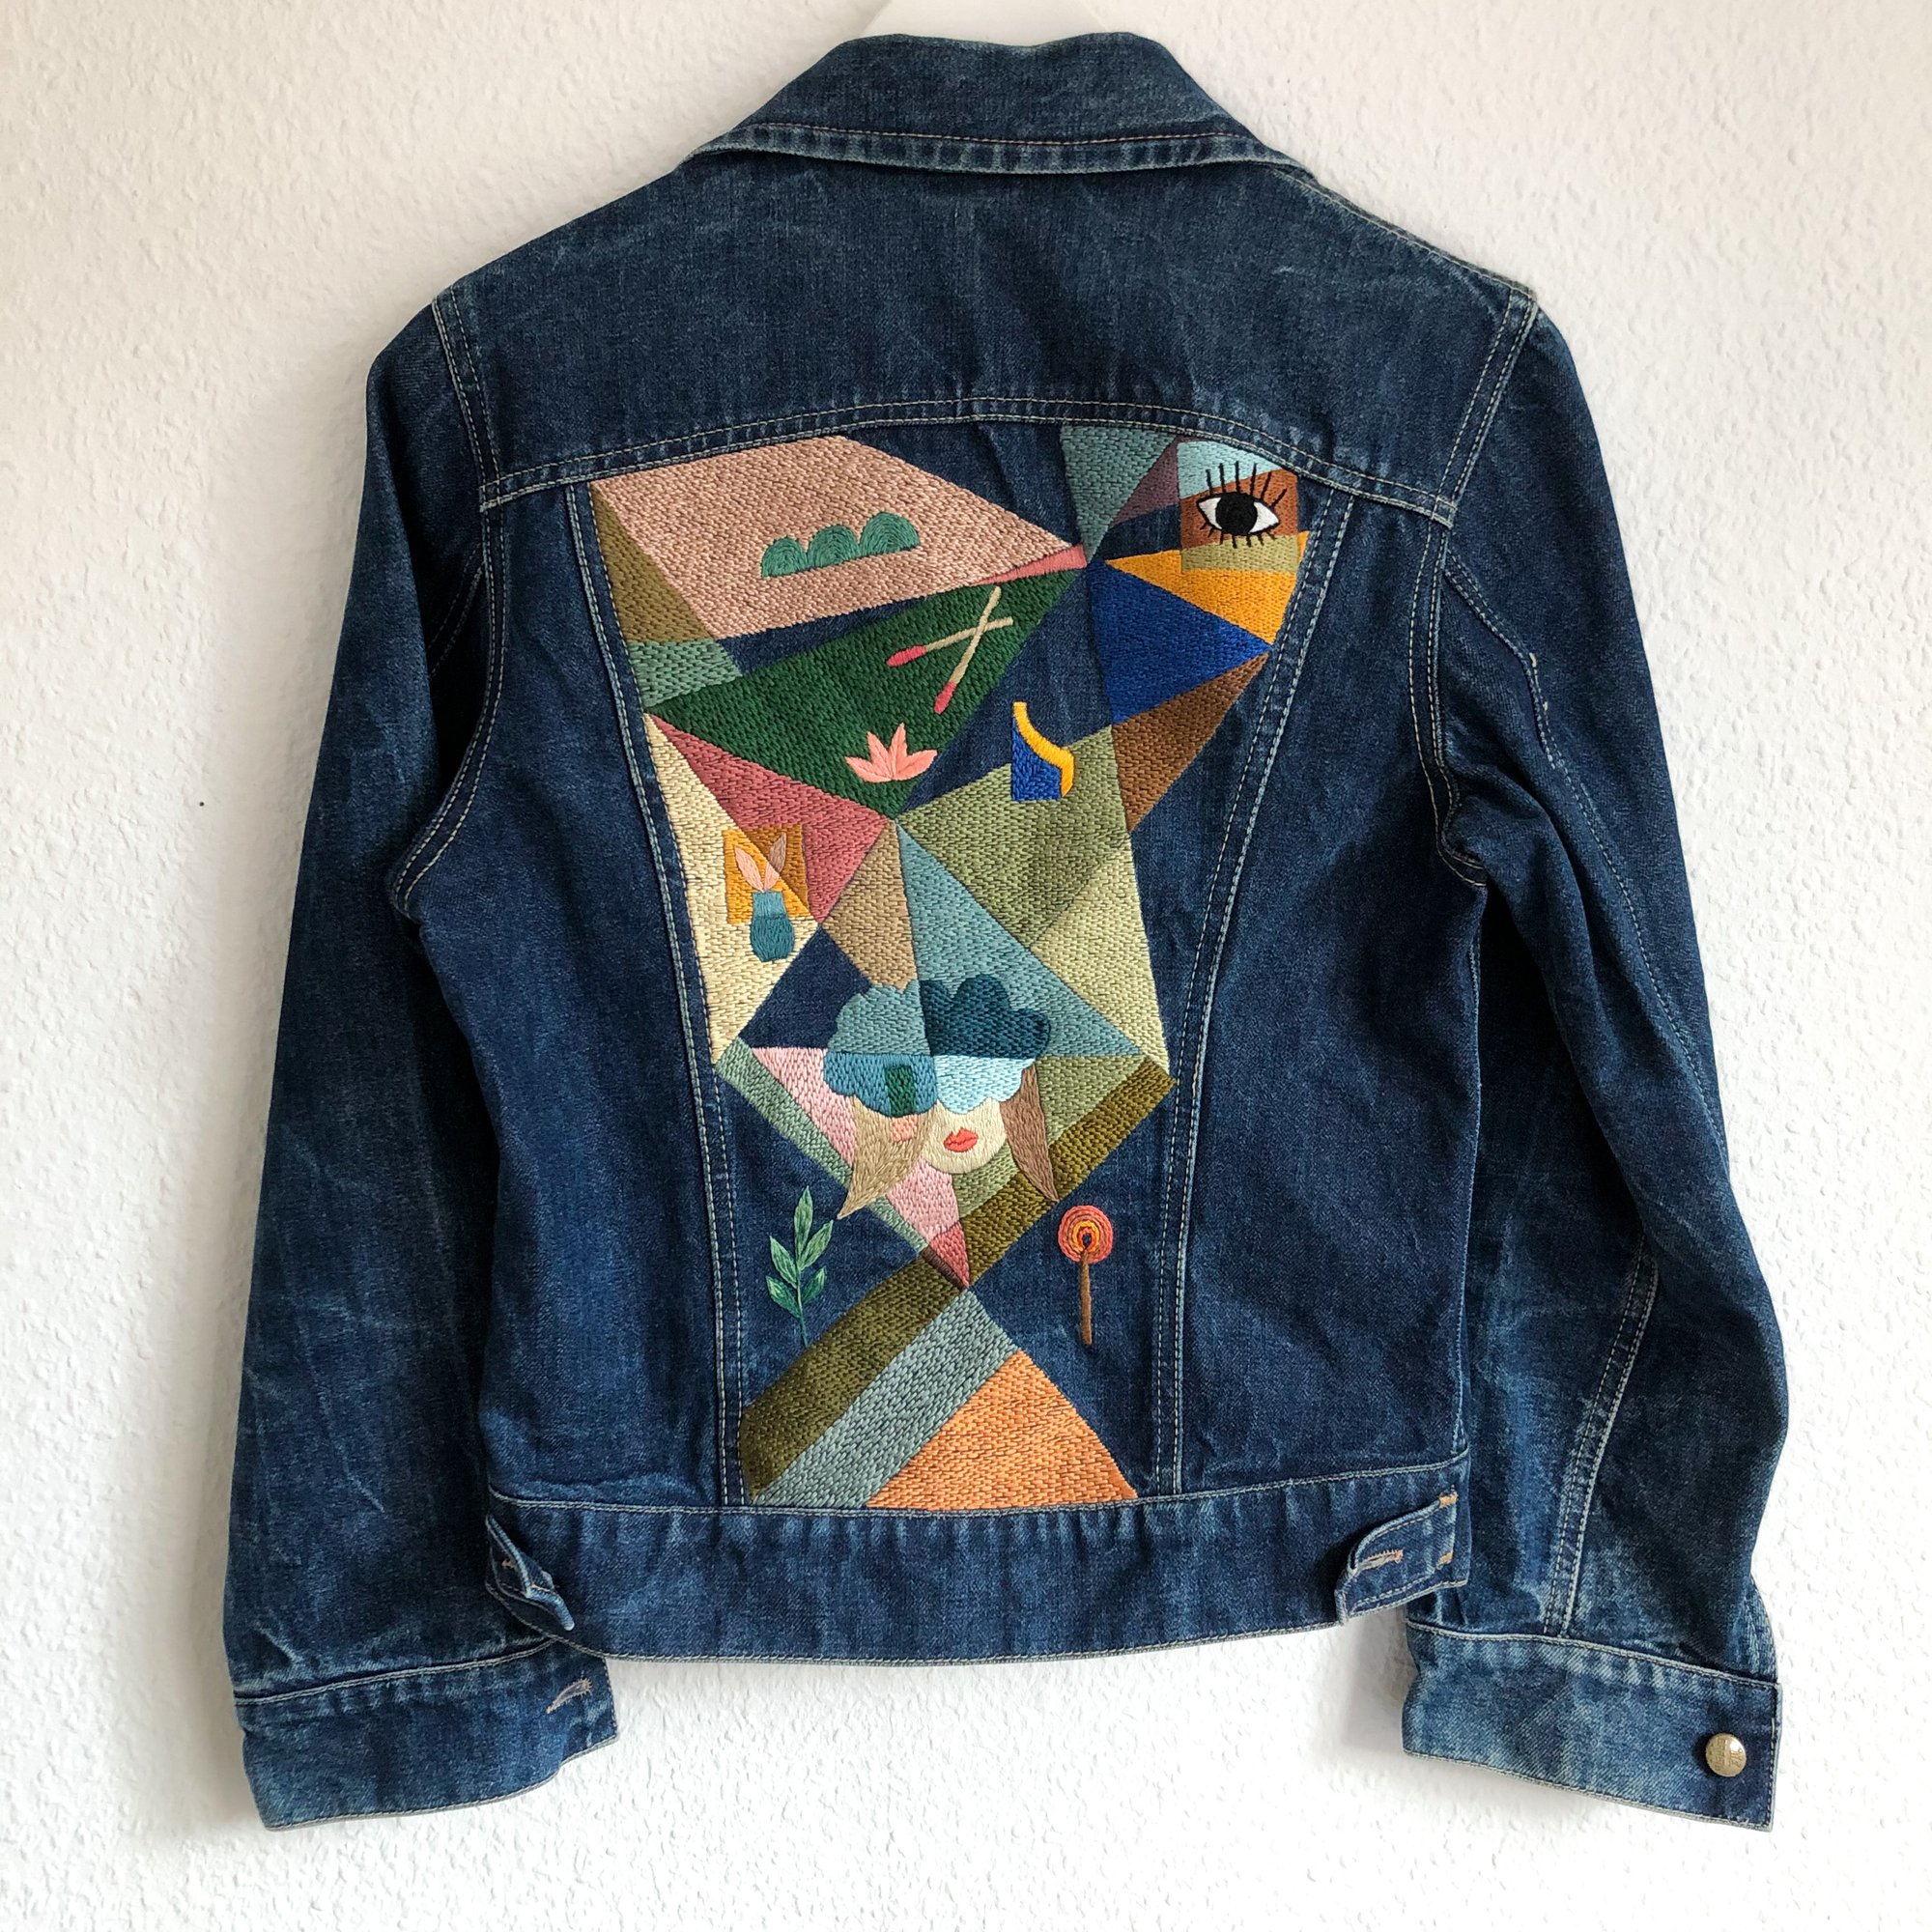 We break too easily, 100+ hours of hand embroidery on a vintage denim  jacket, one of a kind